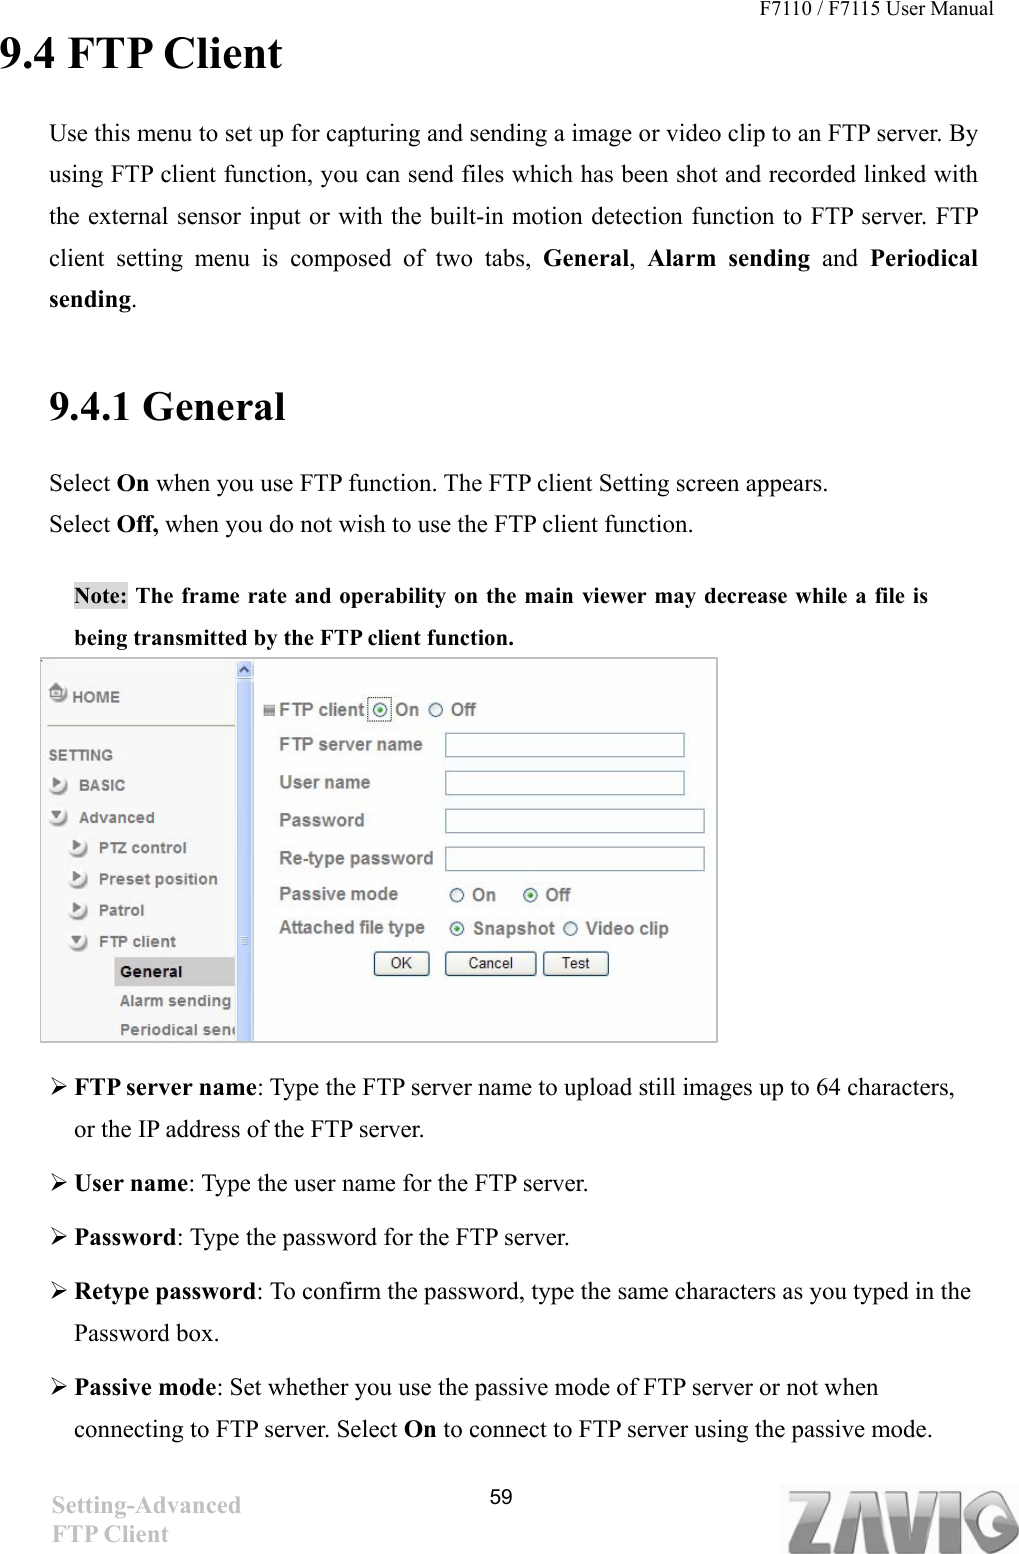 F7110 / F7115 User Manual   9.4 FTP Client Use this menu to set up for capturing and sending a image or video clip to an FTP server. By using FTP client function, you can send files which has been shot and recorded linked with the external sensor input or with the built-in motion detection function to FTP server. FTP client setting menu is composed of two tabs, General,  Alarm sending and  Periodical sending.  9.4.1 General Select On when you use FTP function. The FTP client Setting screen appears.   Select Off, when you do not wish to use the FTP client function.  Note: The frame rate and operability on the main viewer may decrease while a file is being transmitted by the FTP client function.          FTP server name: Type the FTP server name to upload still images up to 64 characters, or the IP address of the FTP server.  User name: Type the user name for the FTP server.  Password: Type the password for the FTP server.  Retype password: To confirm the password, type the same characters as you typed in the Password box.  Passive mode: Set whether you use the passive mode of FTP server or not when connecting to FTP server. Select On to connect to FTP server using the passive mode. Setting-Advanced FTP Client   59